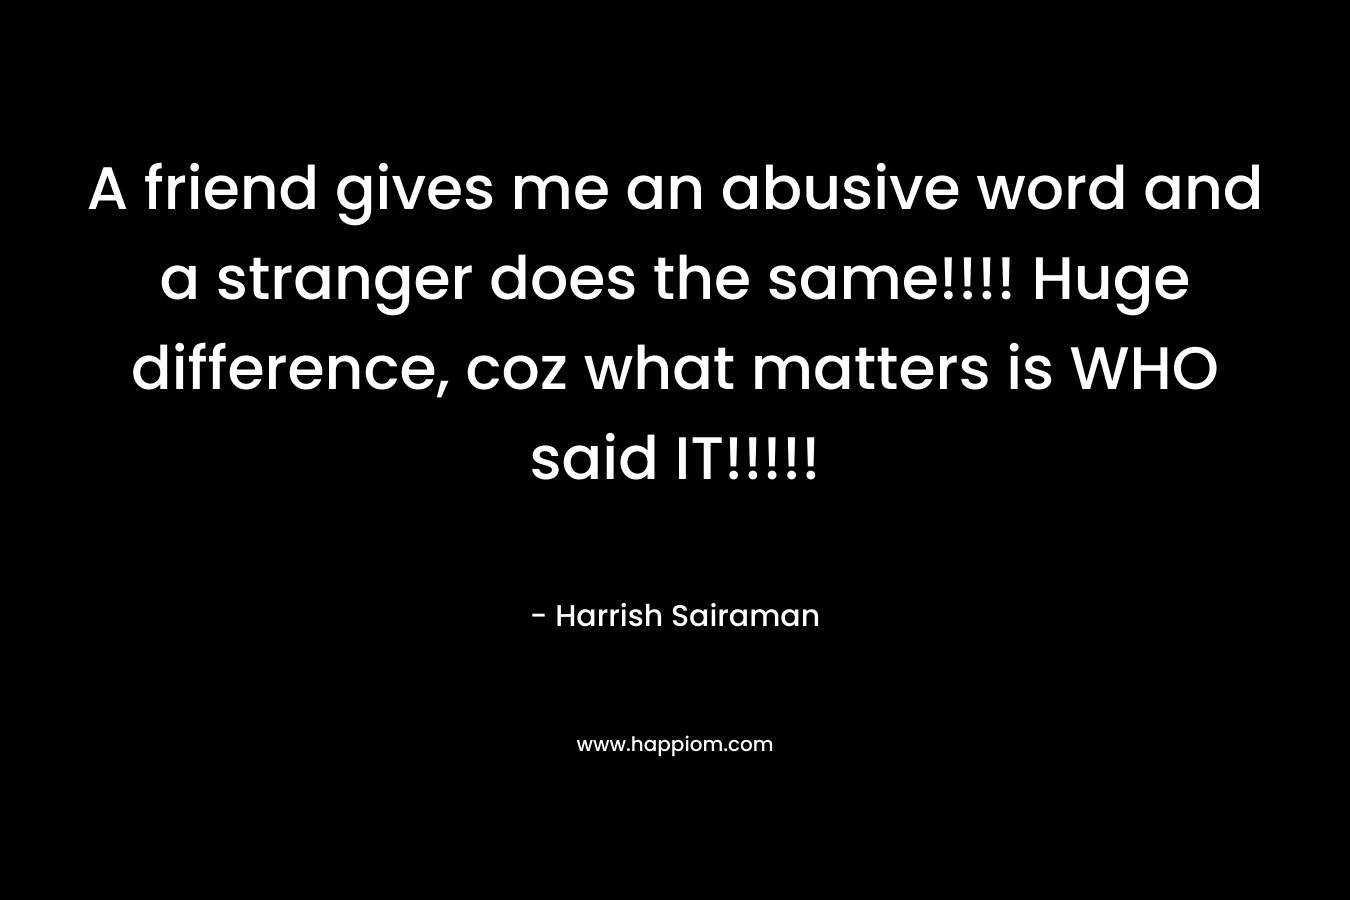 A friend gives me an abusive word and a stranger does the same!!!! Huge difference, coz what matters is WHO said IT!!!!! – Harrish Sairaman